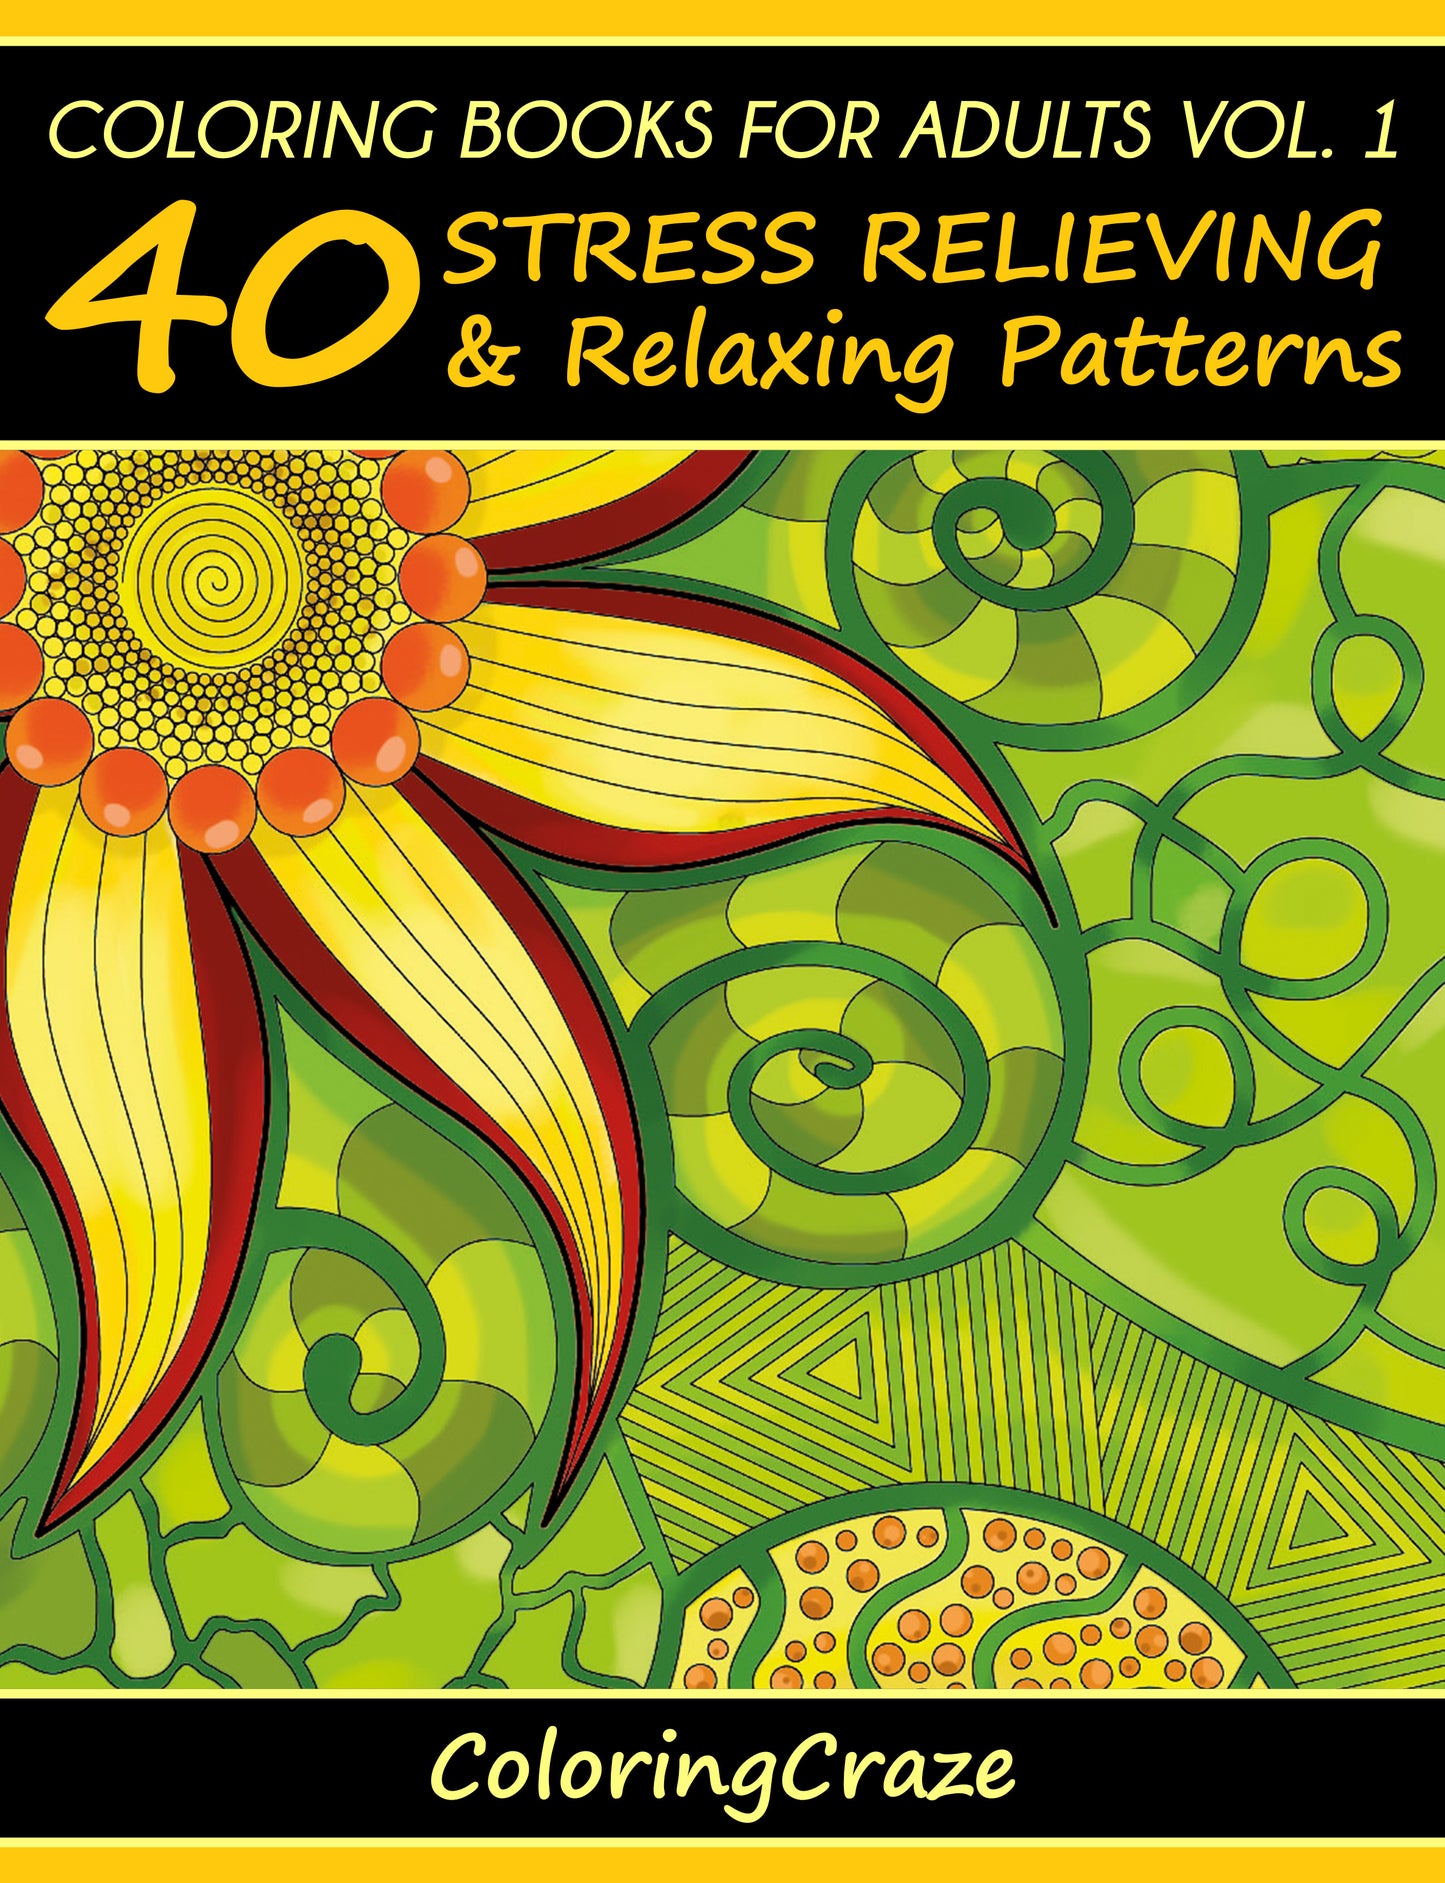 40 Stress Relieving & Relaxing Patterns, Volume 1